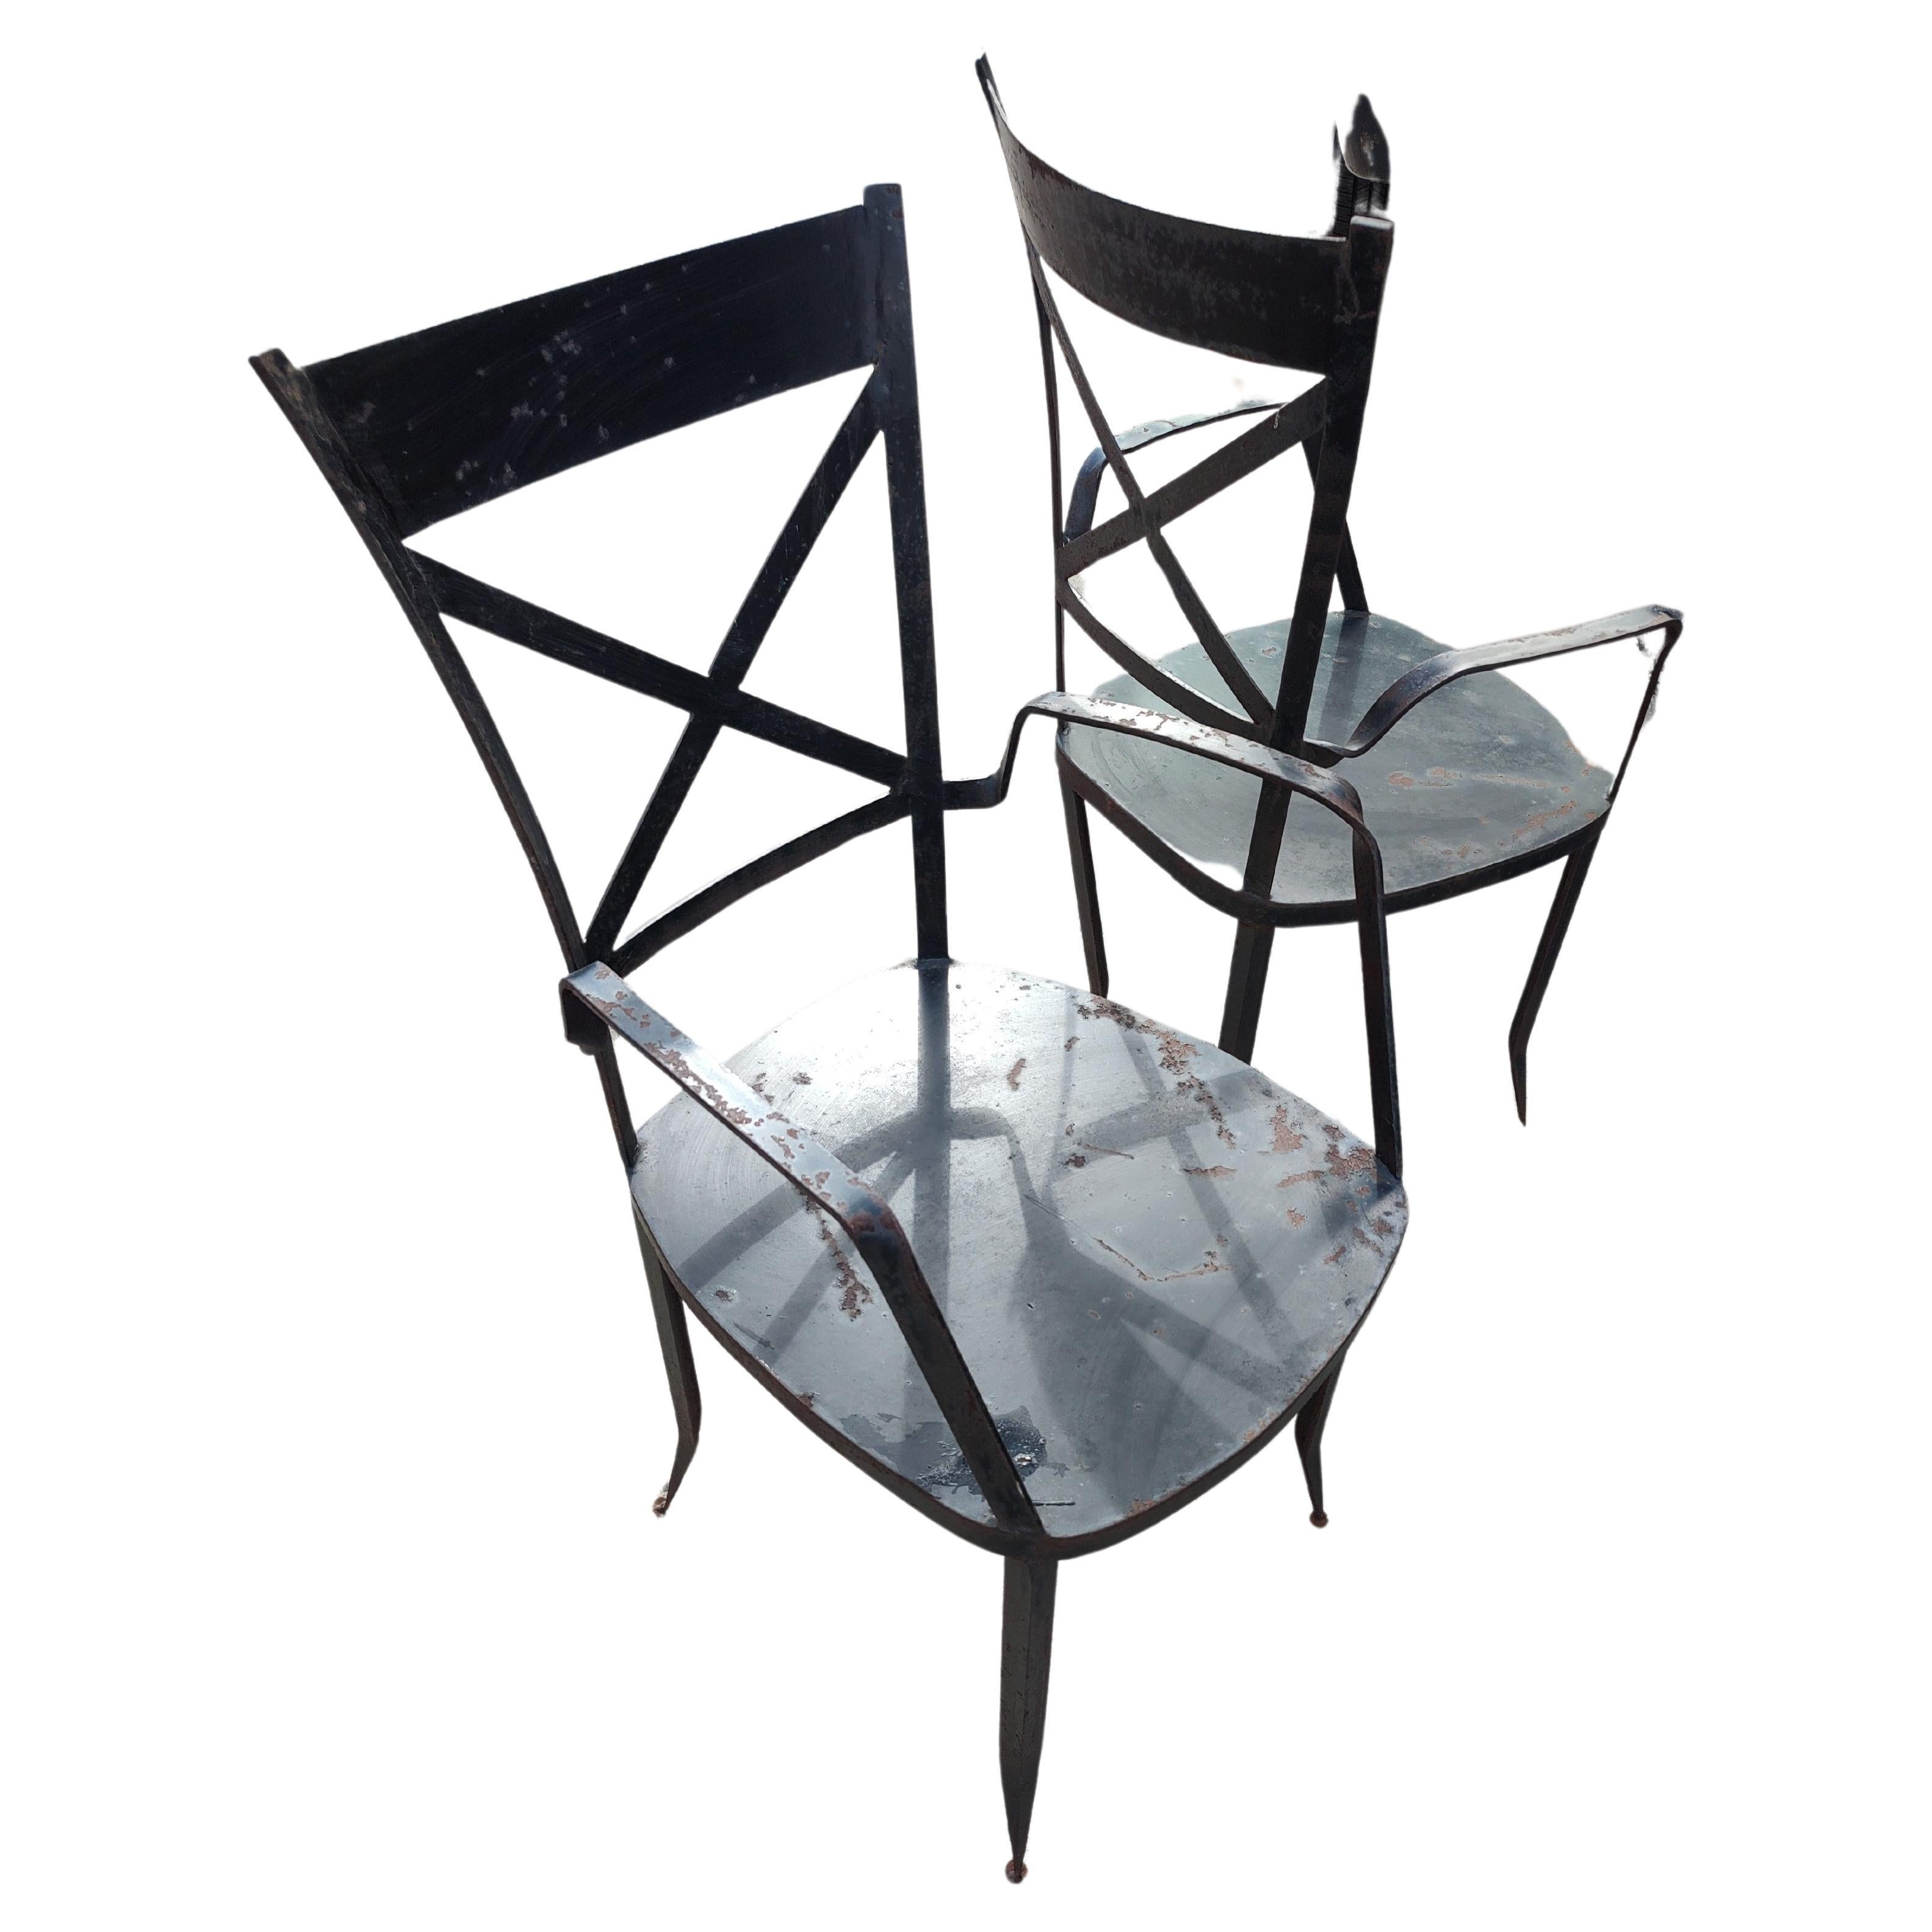 Late 20th Century Pair of Heavy Duty High Quality Iron Modern Sculptural Garden Patio Armchairs   For Sale